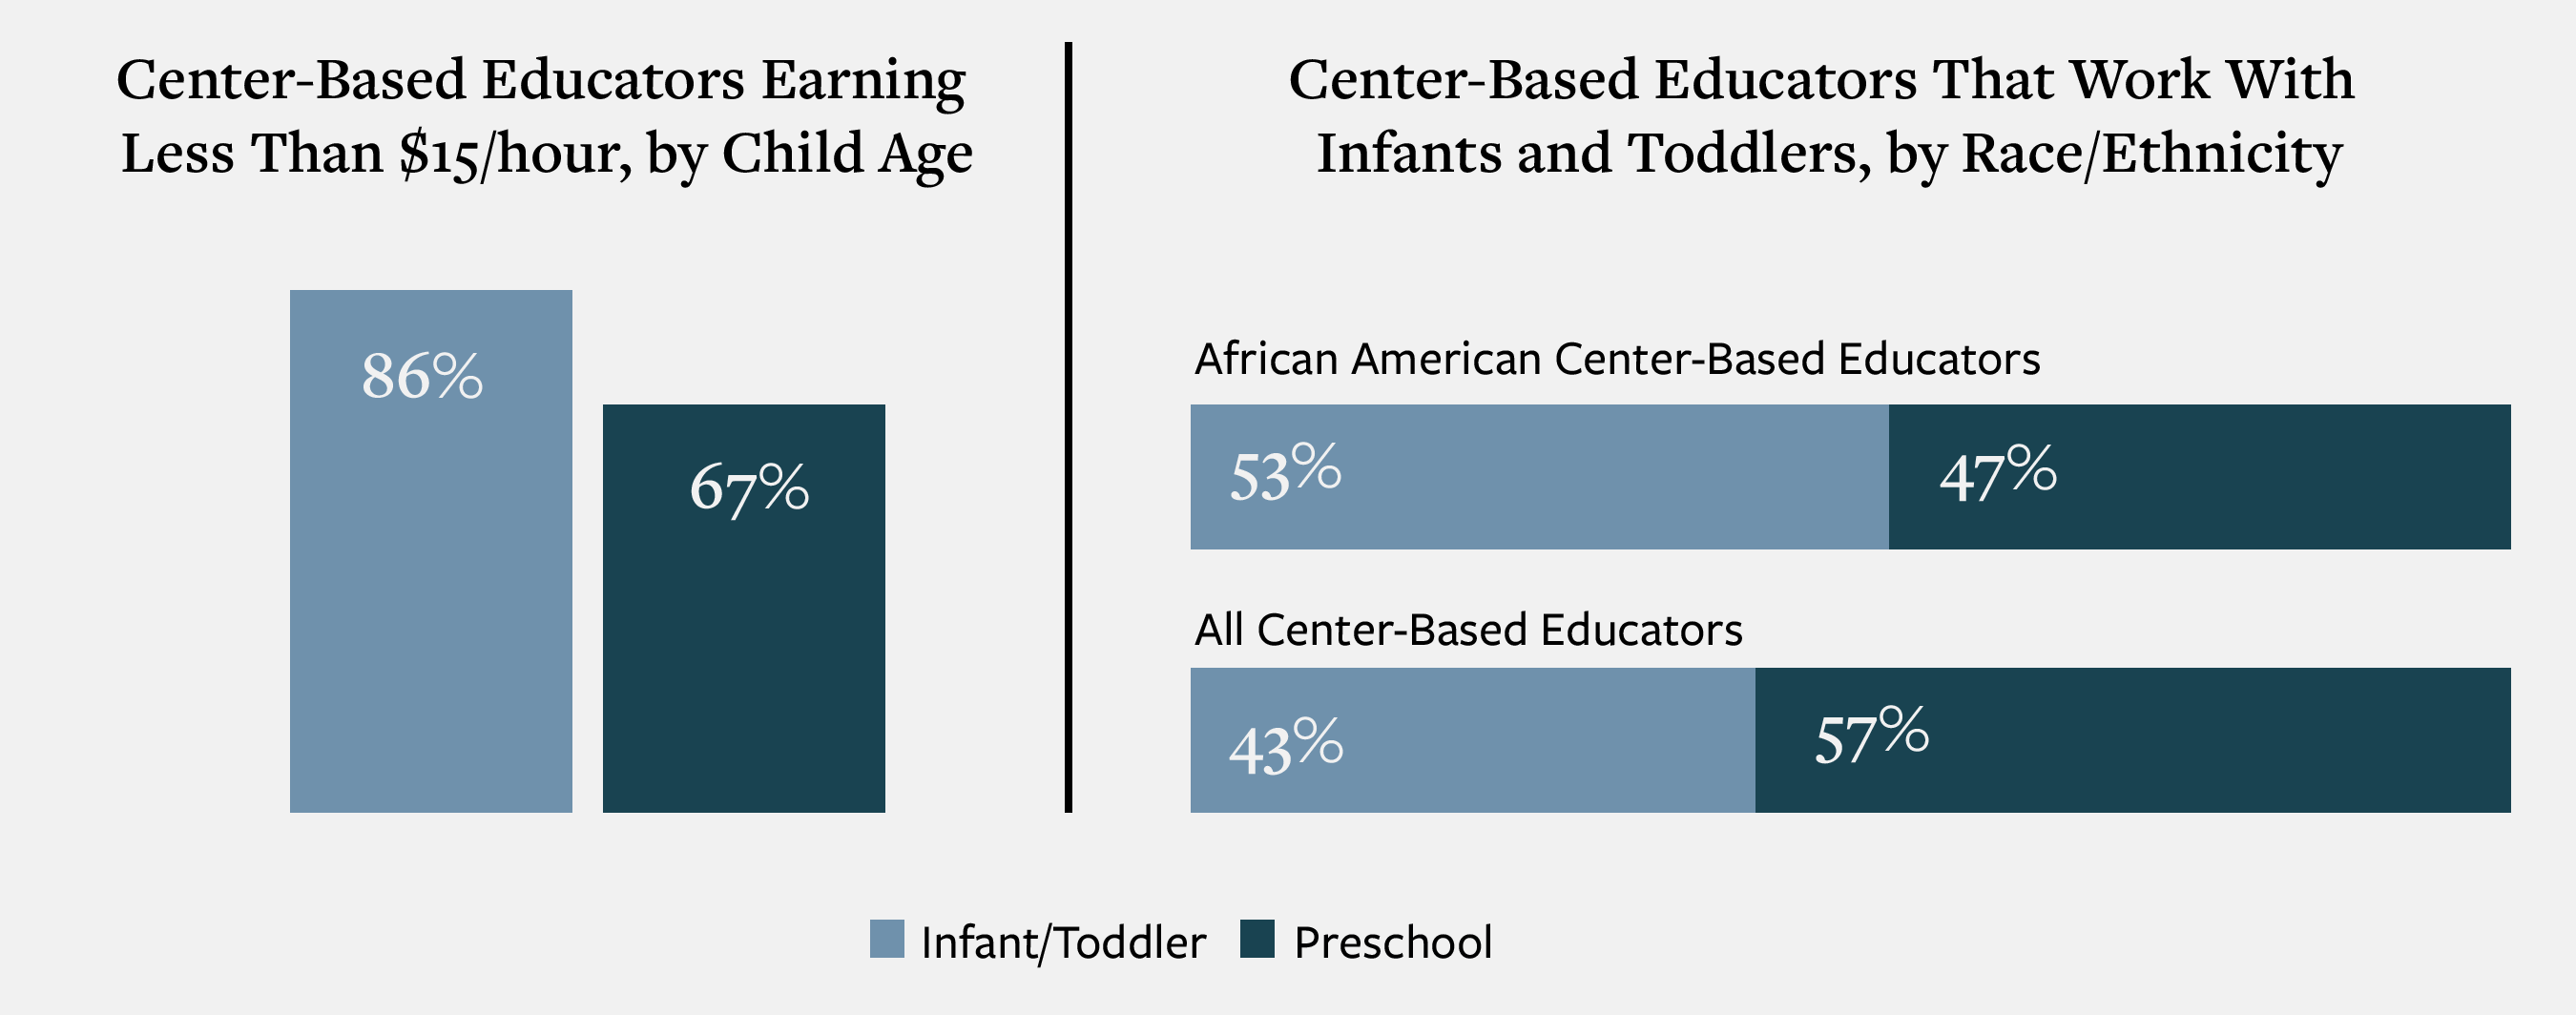 Bar chart 1: Compares the infant center-based educators and preschool center-based educators that earn less than $15 per hour.
Bar chart 2: Compares center-based educators that work with infants and toddlers, by race and ethnicity.